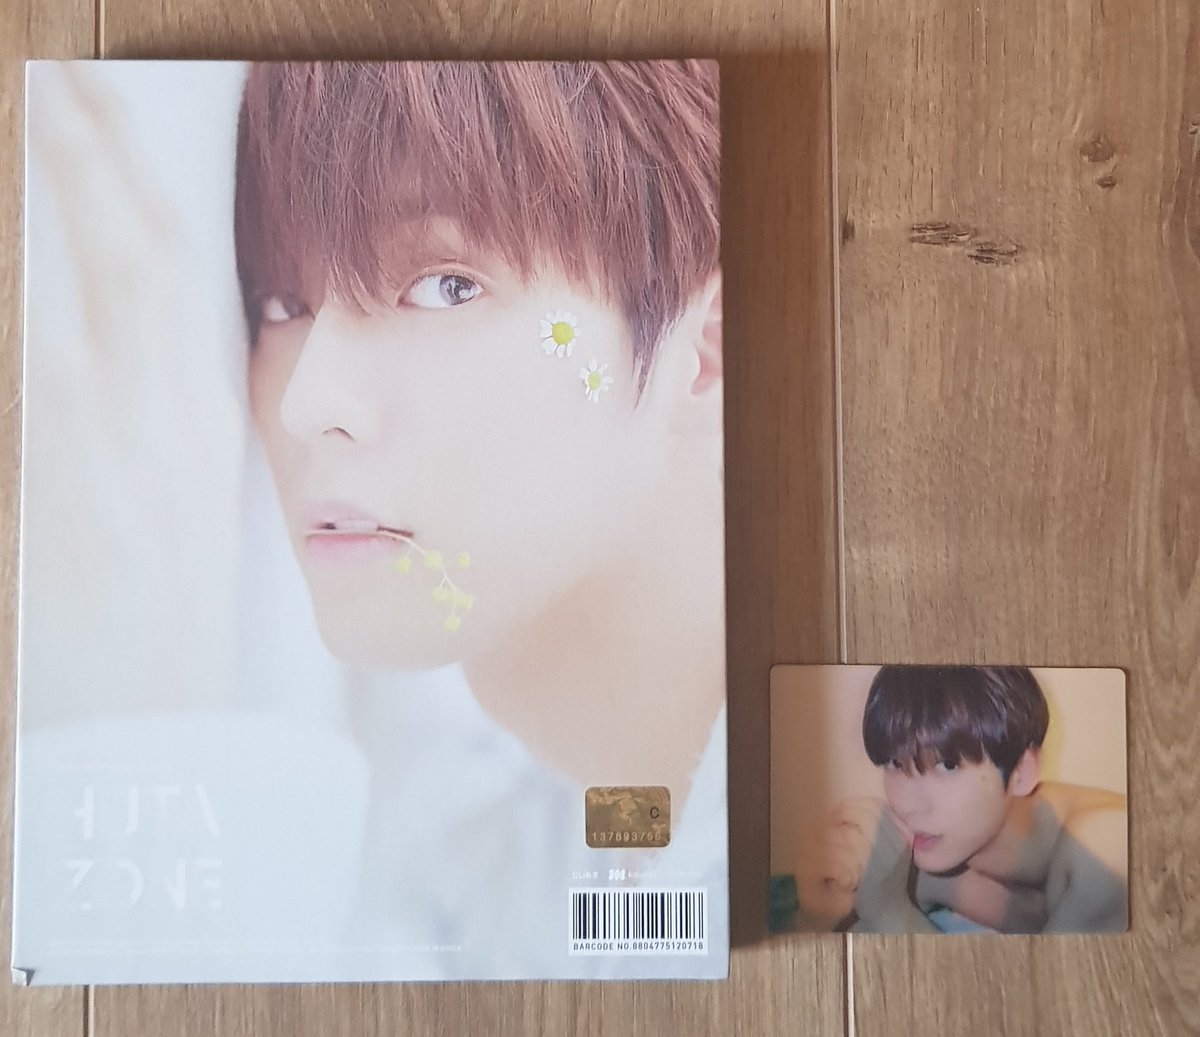 HUTA - Hutazone 2 Photocards Favorite Song : Waiting For You